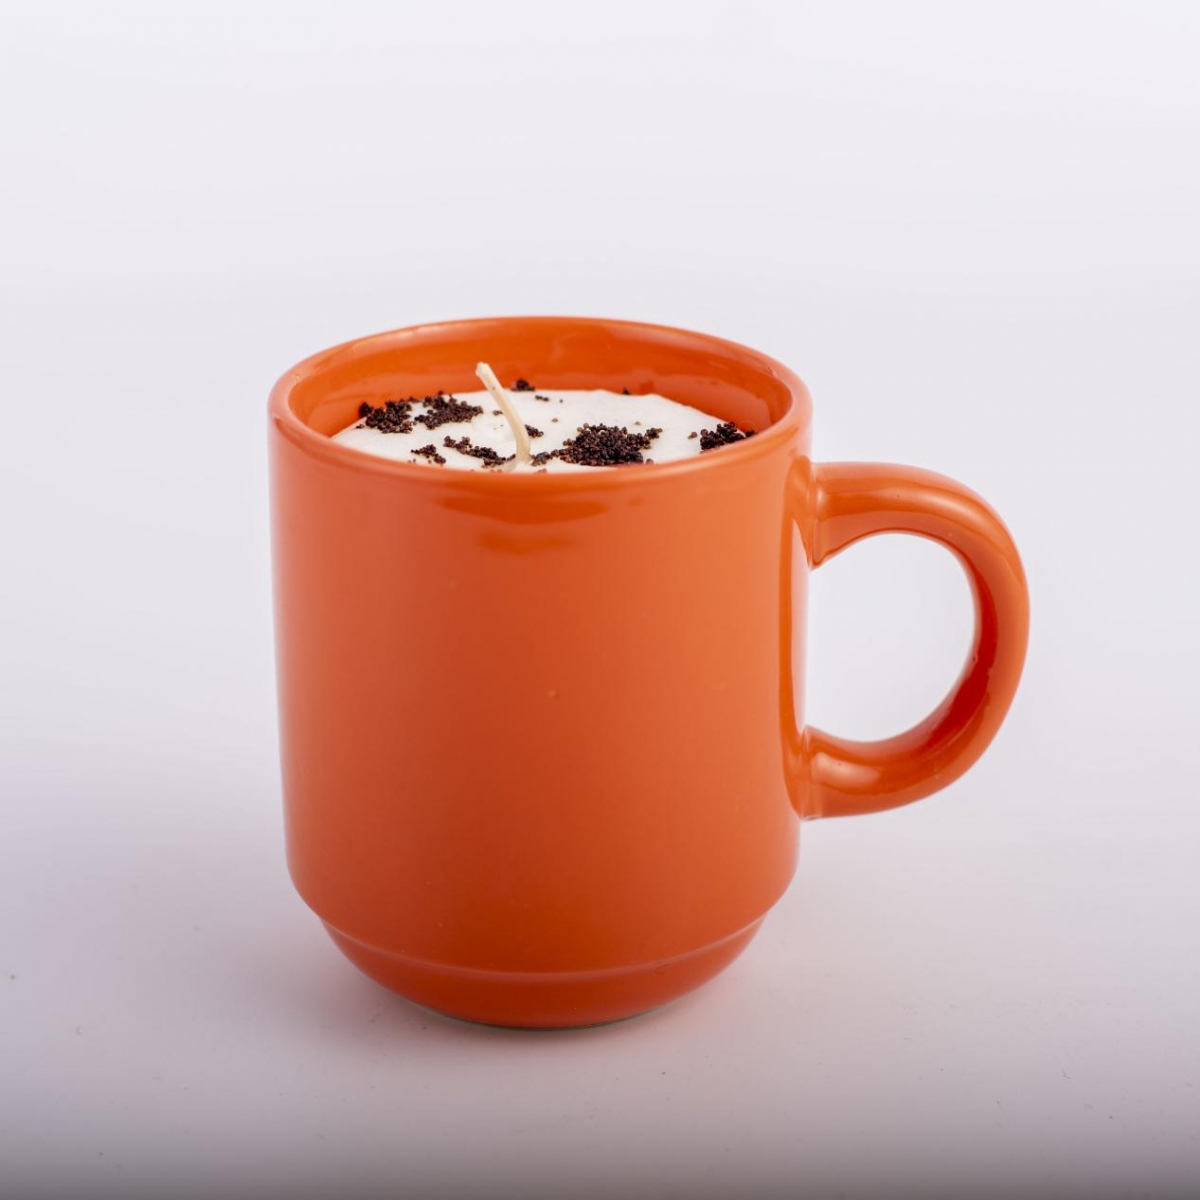 Coffee Candles : Soy Wax ,Whipped Cream ,Chocolate ,Scented Candles, Orange Ceramic Mug ,China Factory ,Price-HOWCANDLE-Candles,Scented Candles,Aromatherapy Candles,Soy Candles,Vegan Candles,Jar Candles,Pillar Candles,Candle Gift Sets,Essential Oils,Reed Diffuser,Candle Holder,